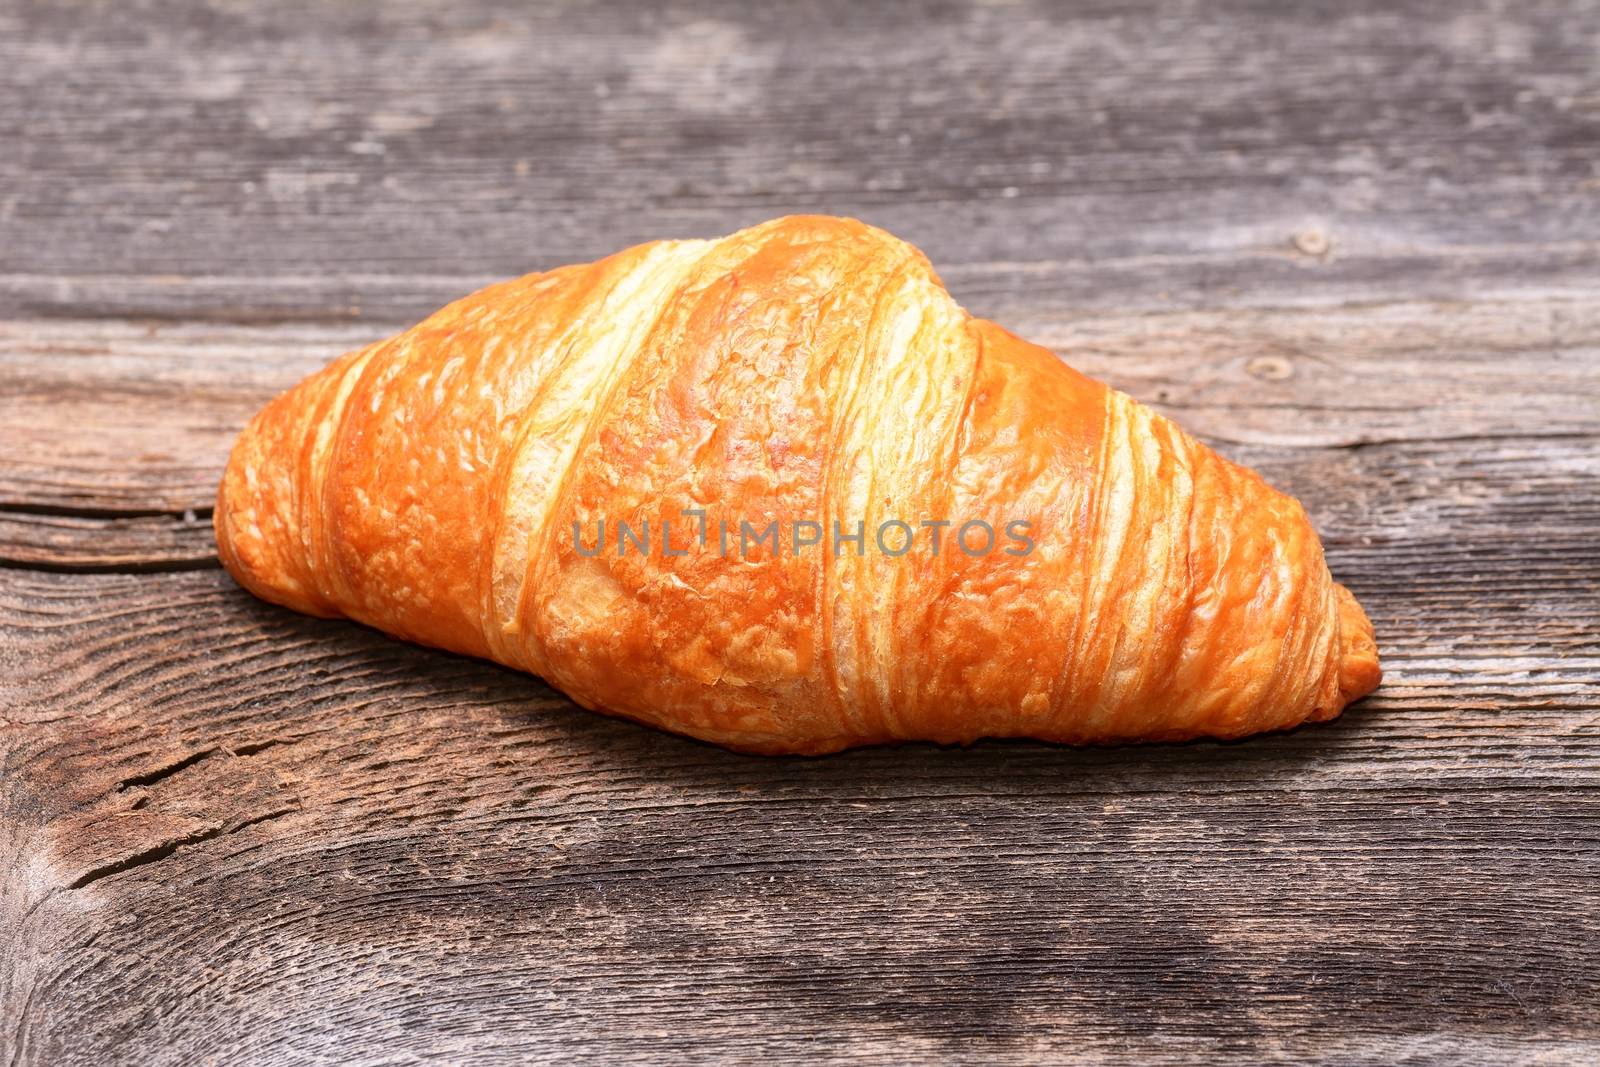 Fresh baked croissants on woodem table by comet